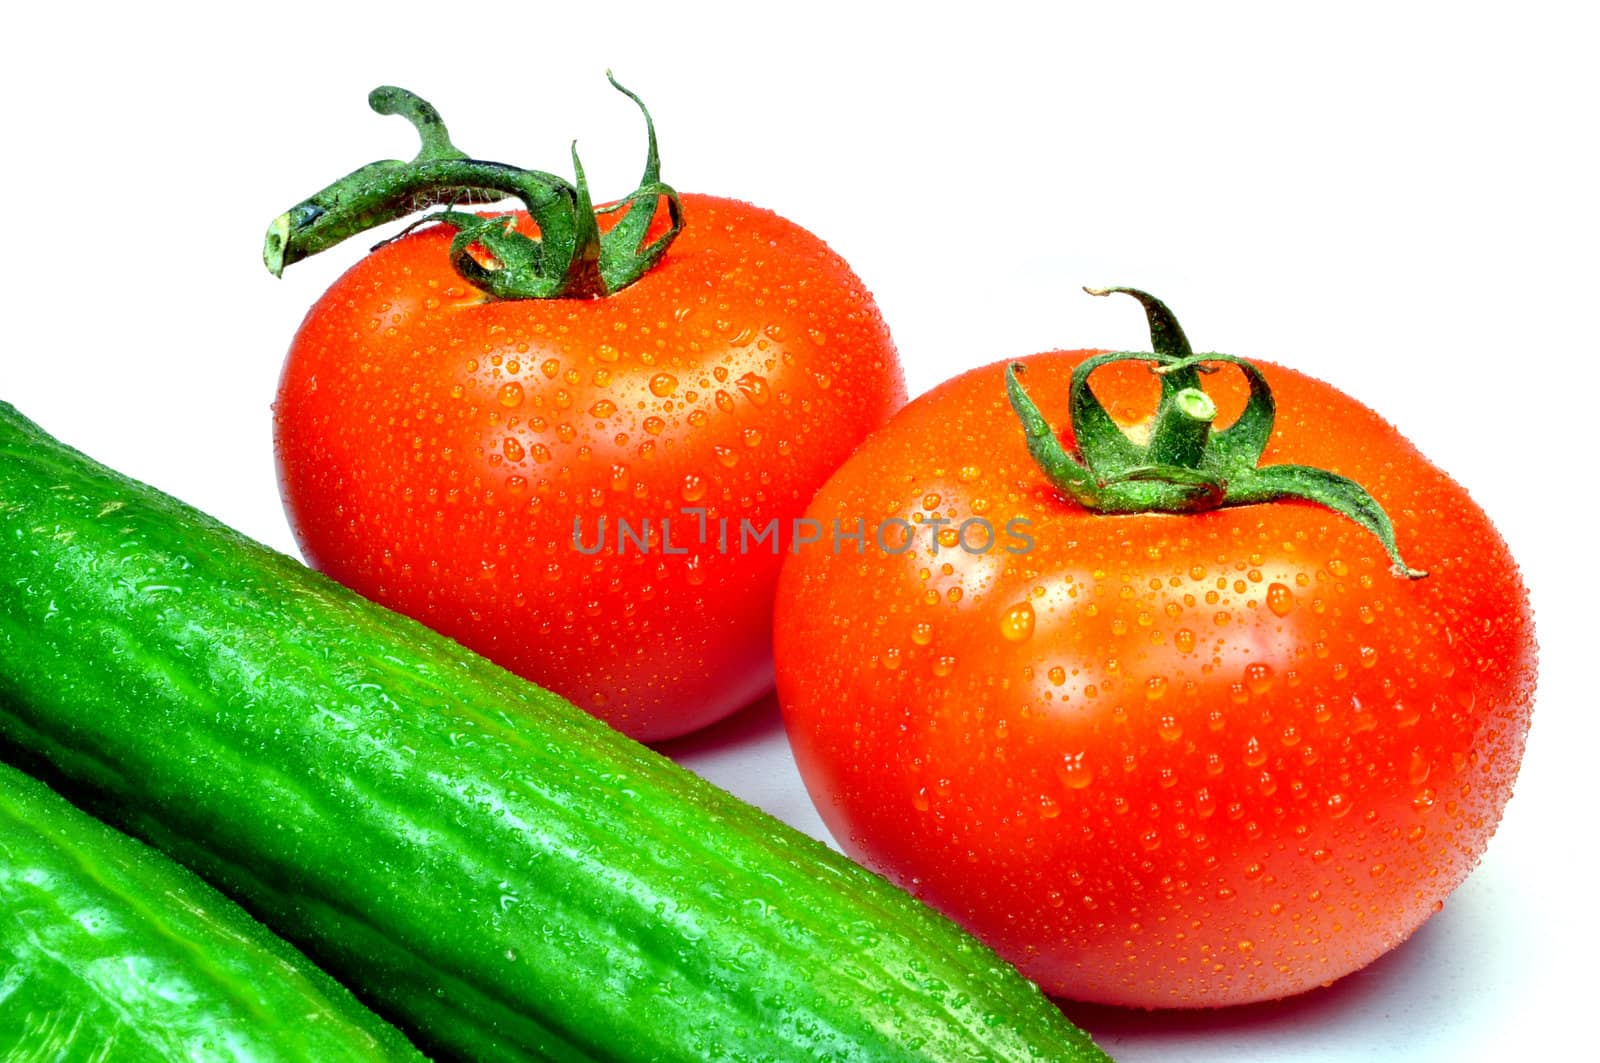 Tomatoes and cucumbers by FER737NG